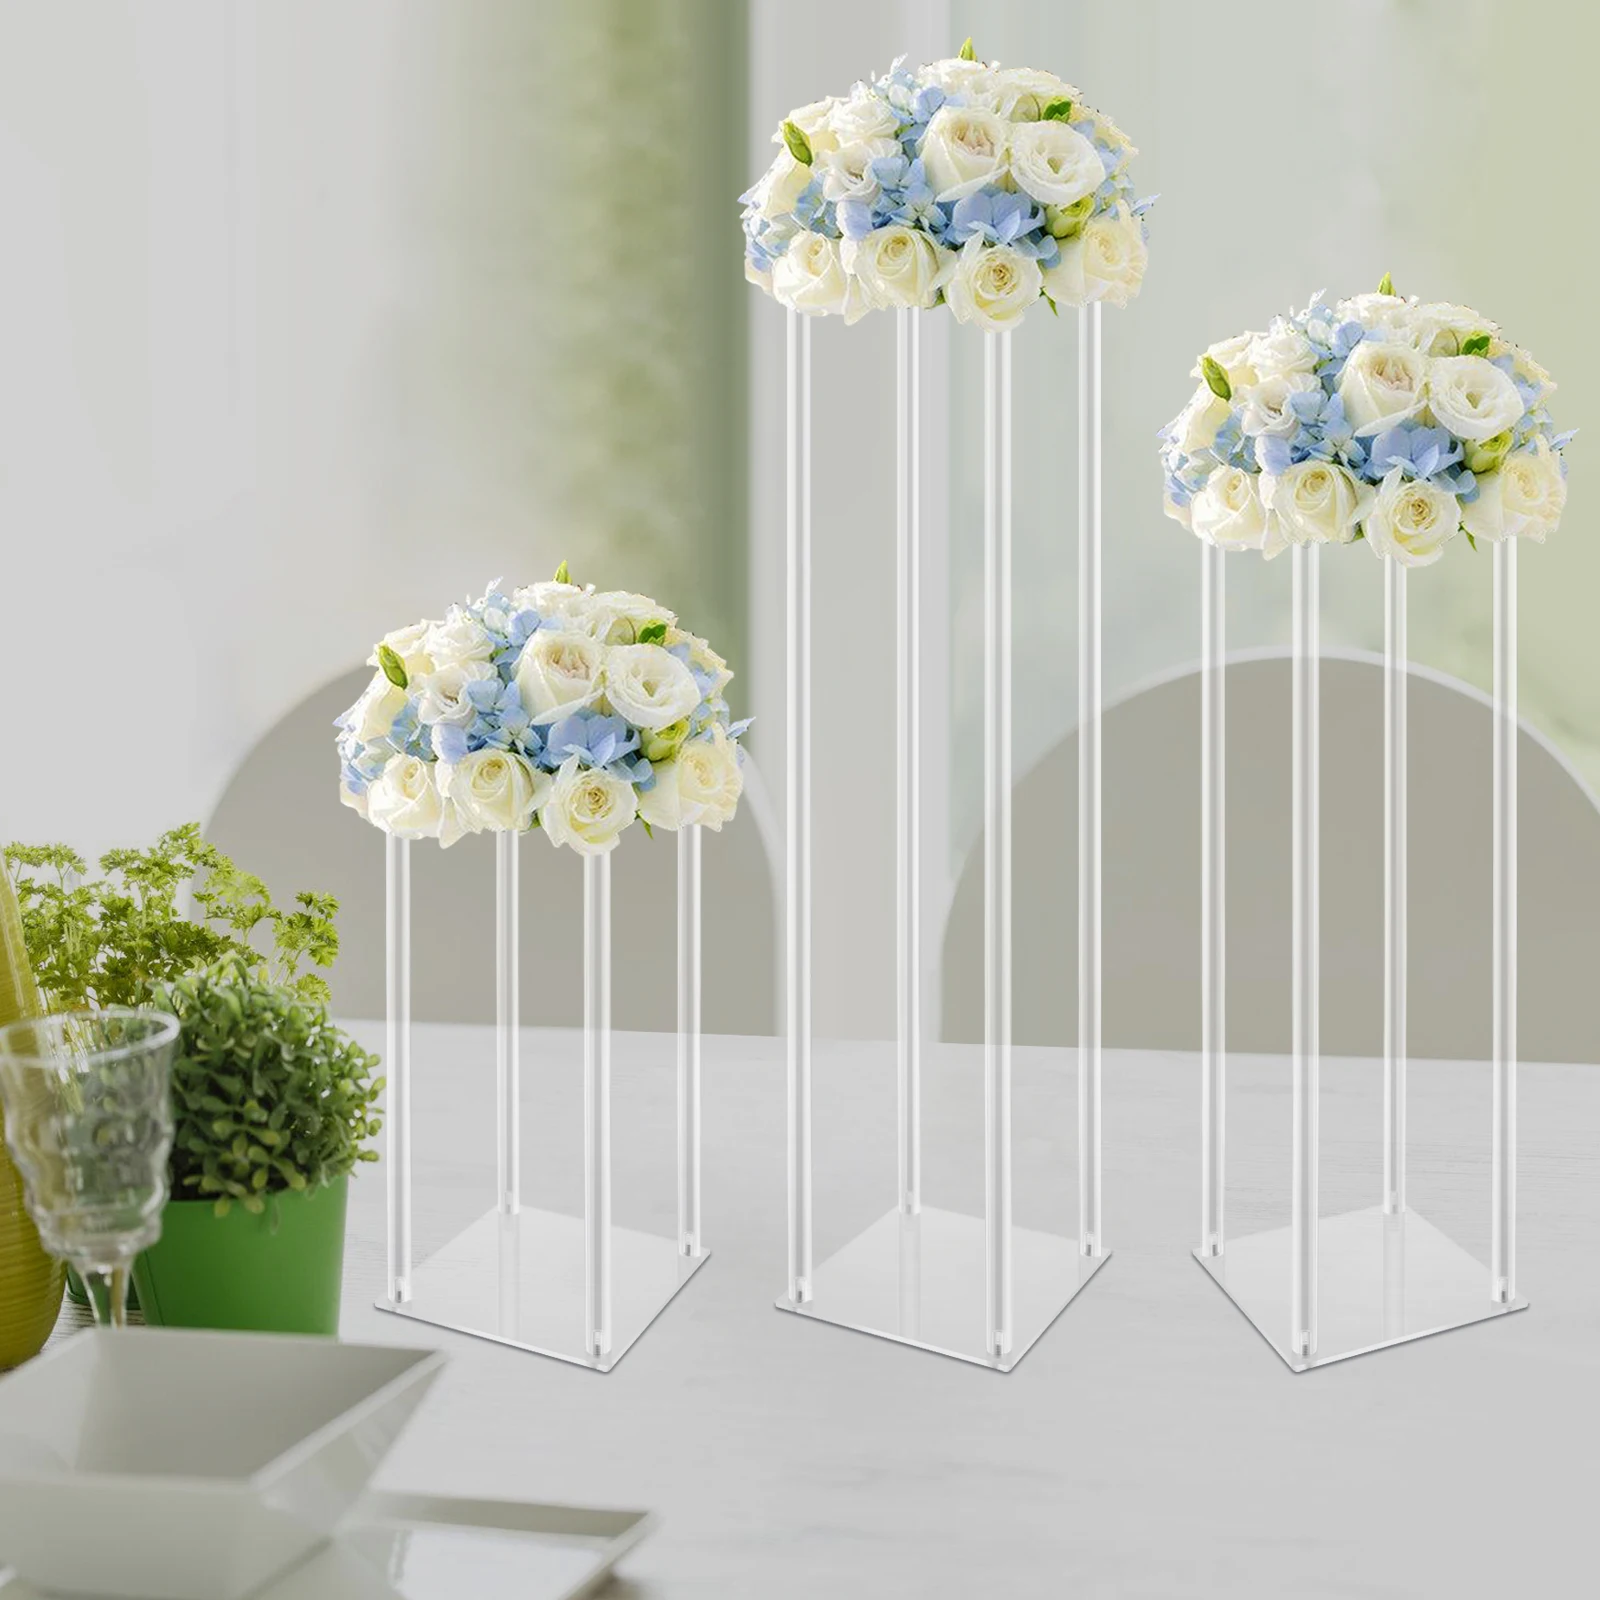 

Acrylic Vase Wedding Centrepieces 3 Pcs Clear Column Flower Display Stand Geometric Display Stand for Home Decor